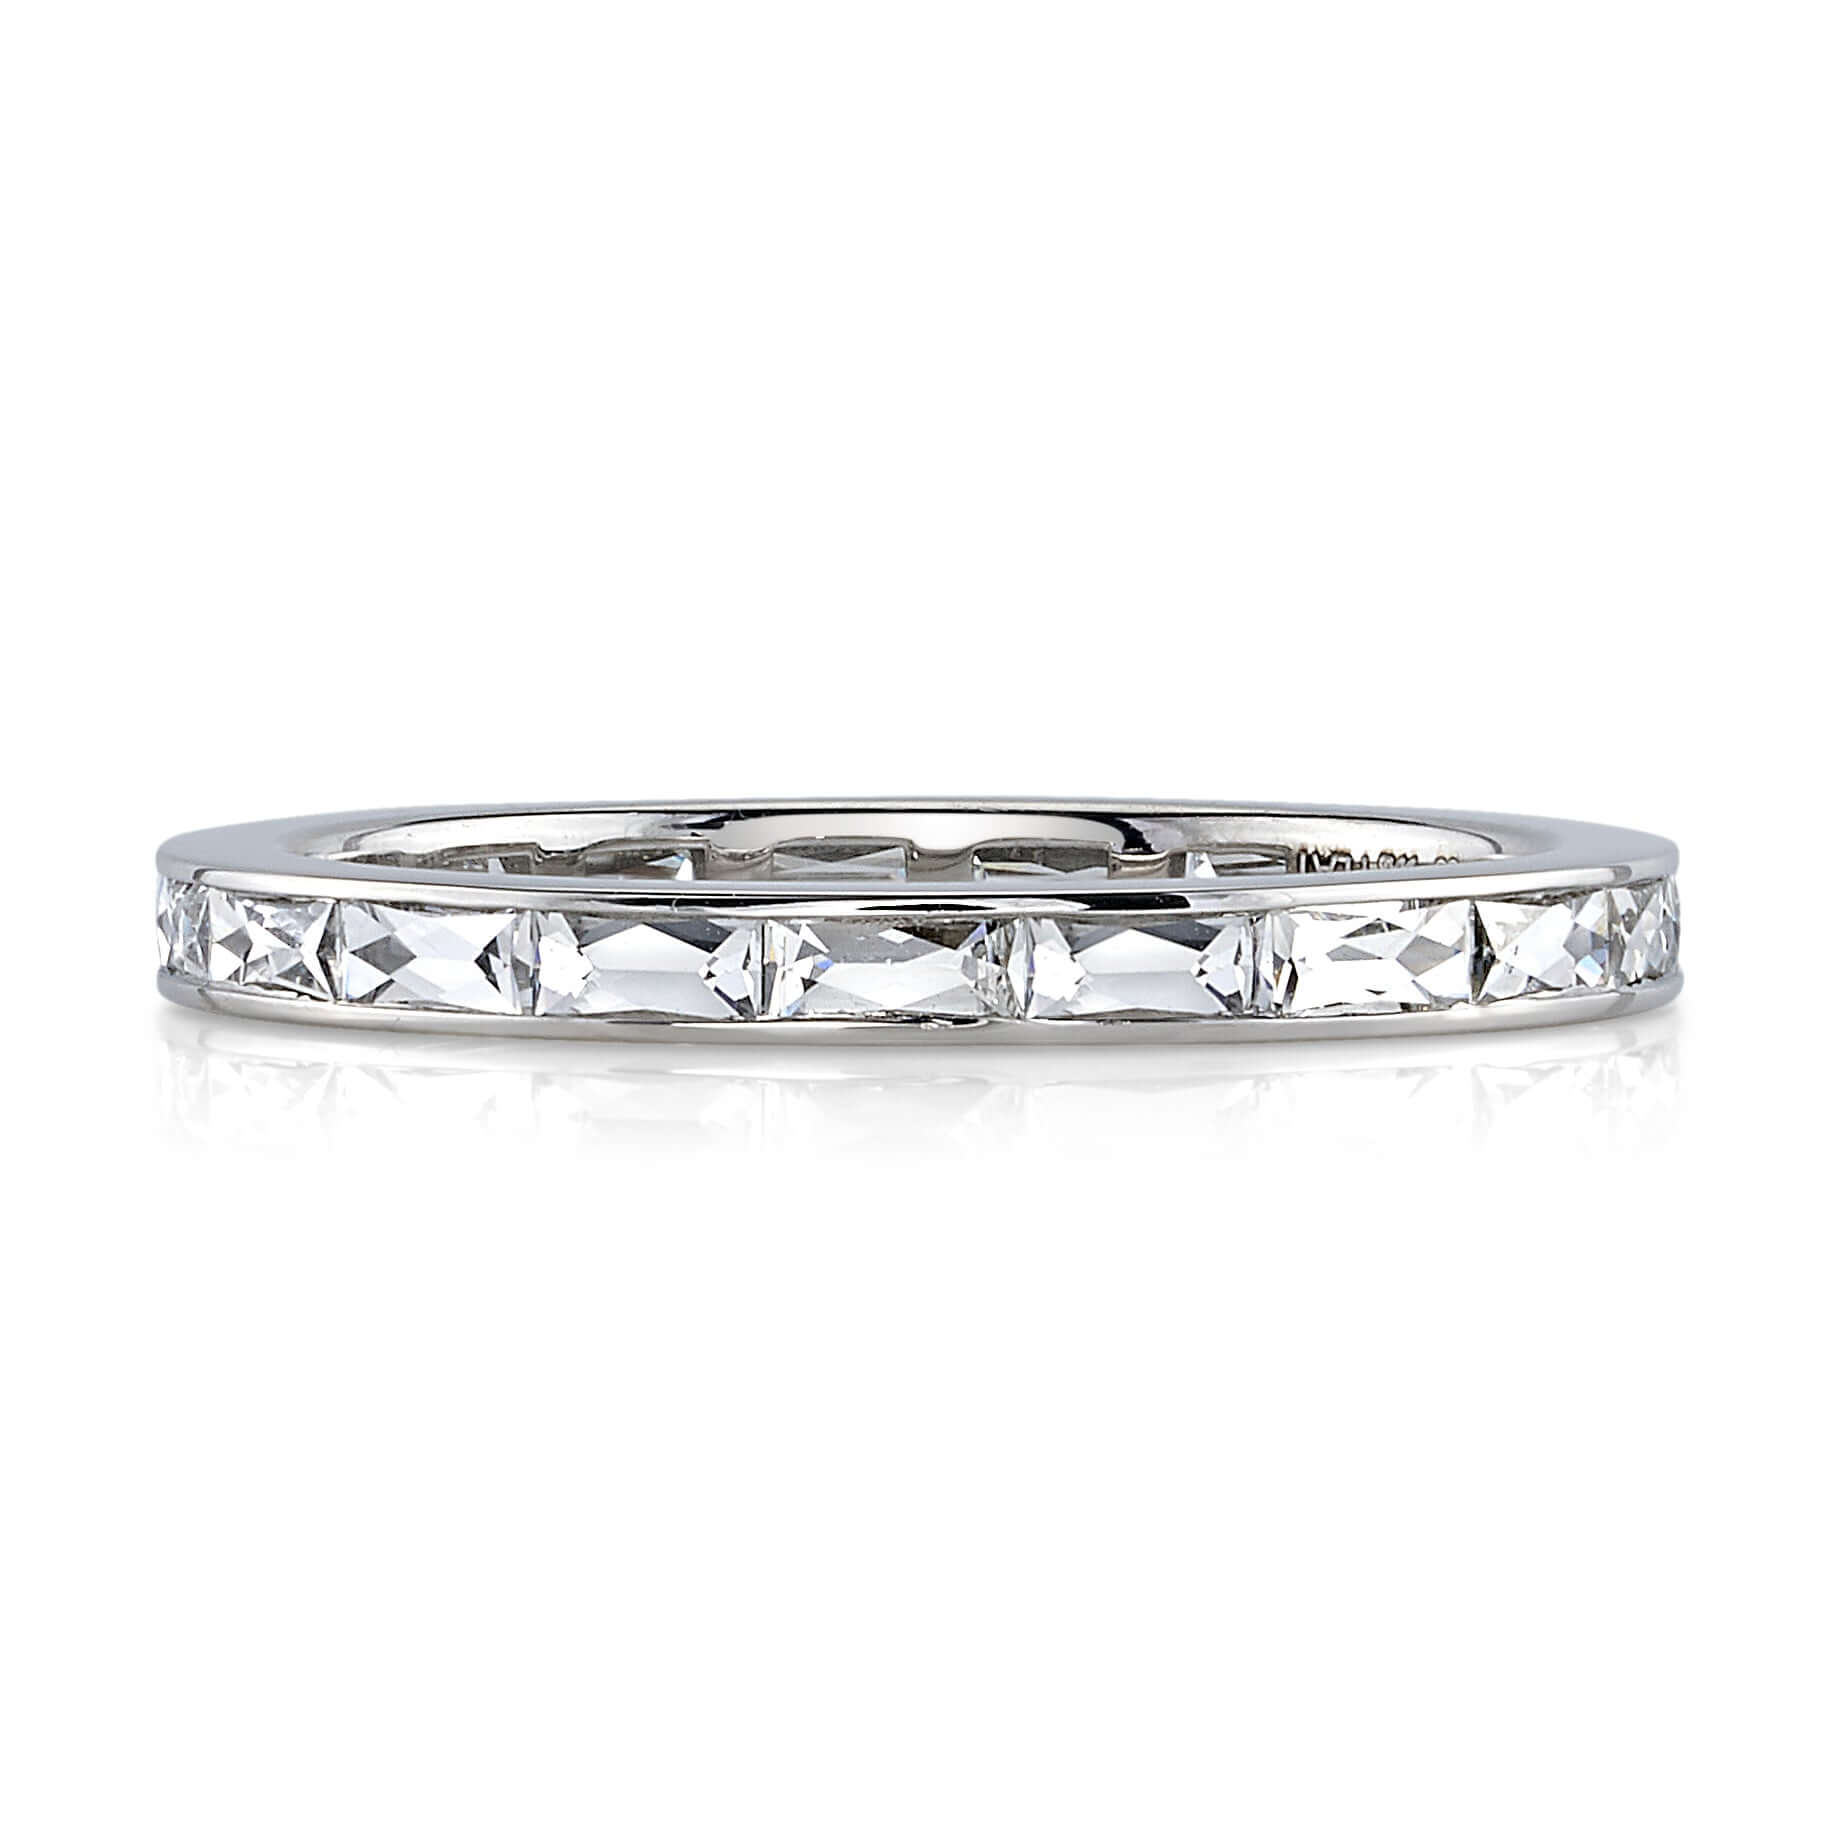 SINGLE STONE EMMA BAND | Approximately 0.90ctw G-H/VS French cut diamonds channel set in a handcrafted eternity band. Approximate band width 2mm. Please inquire for additional customization.